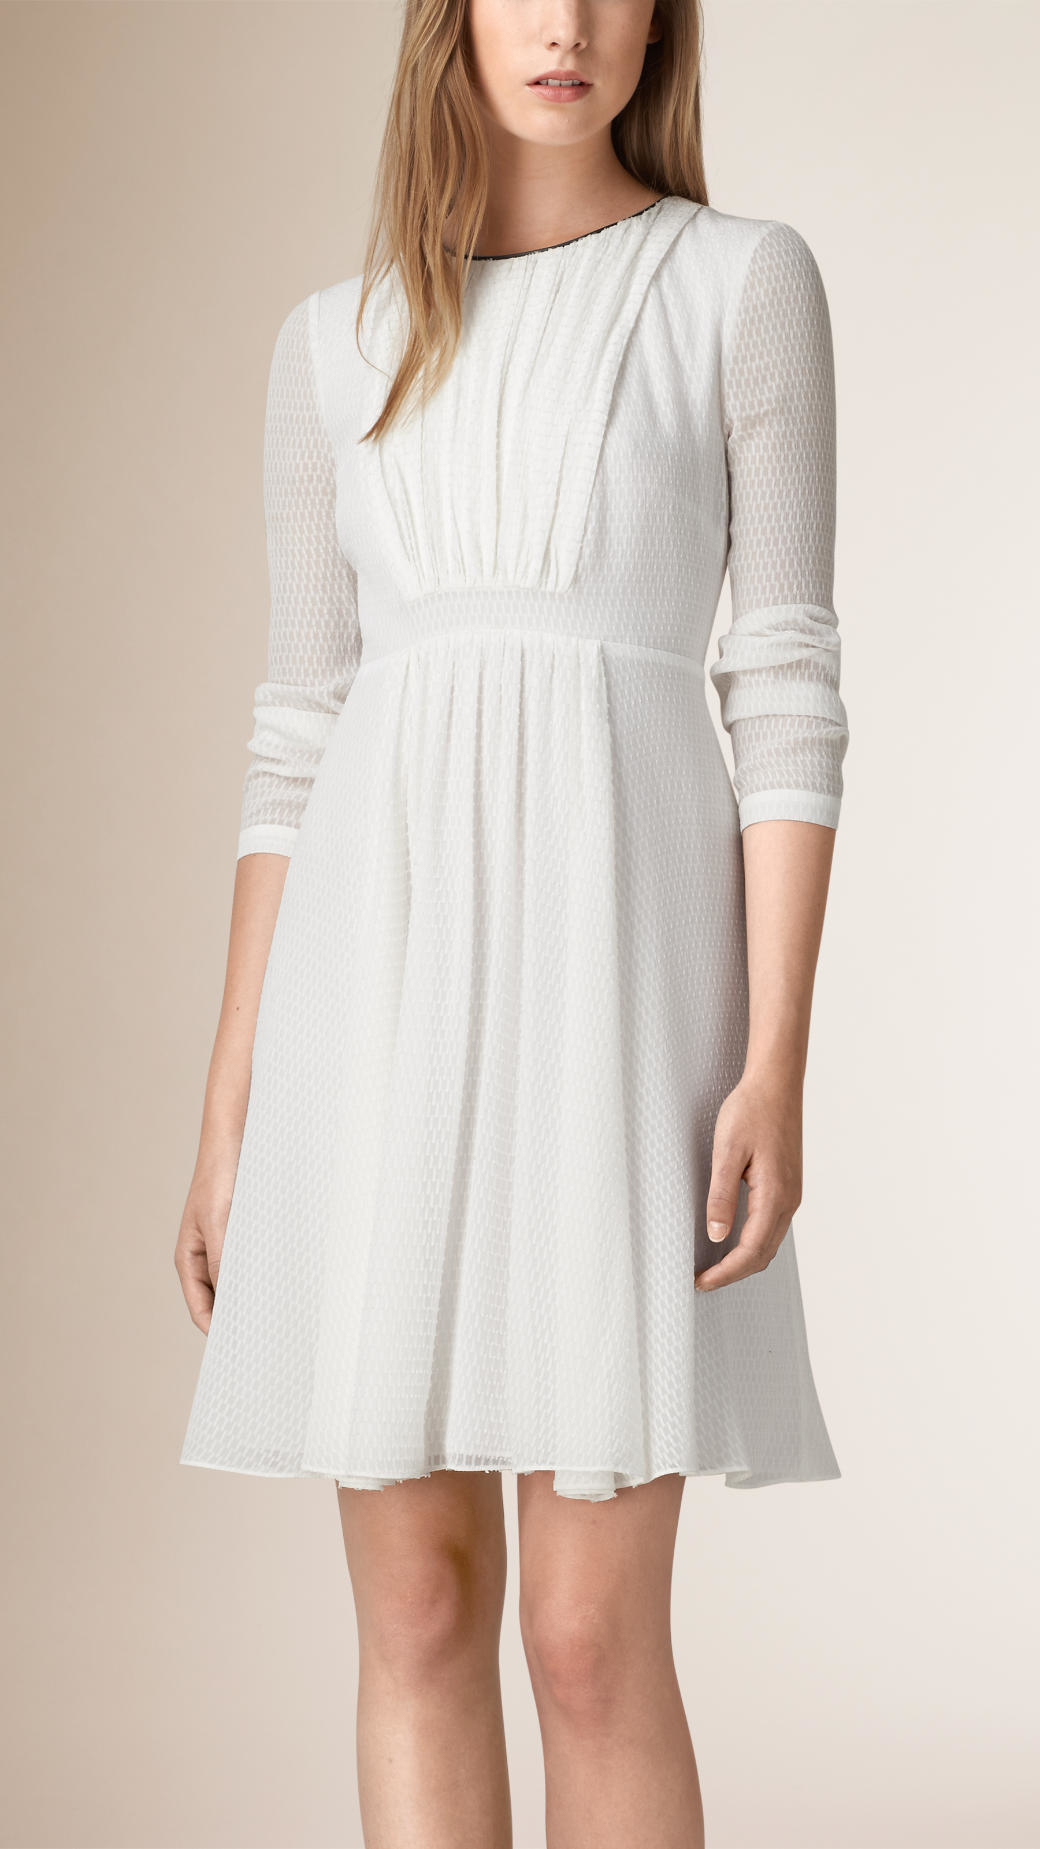 Lyst - Burberry Textured Silk Crepe Dress in White